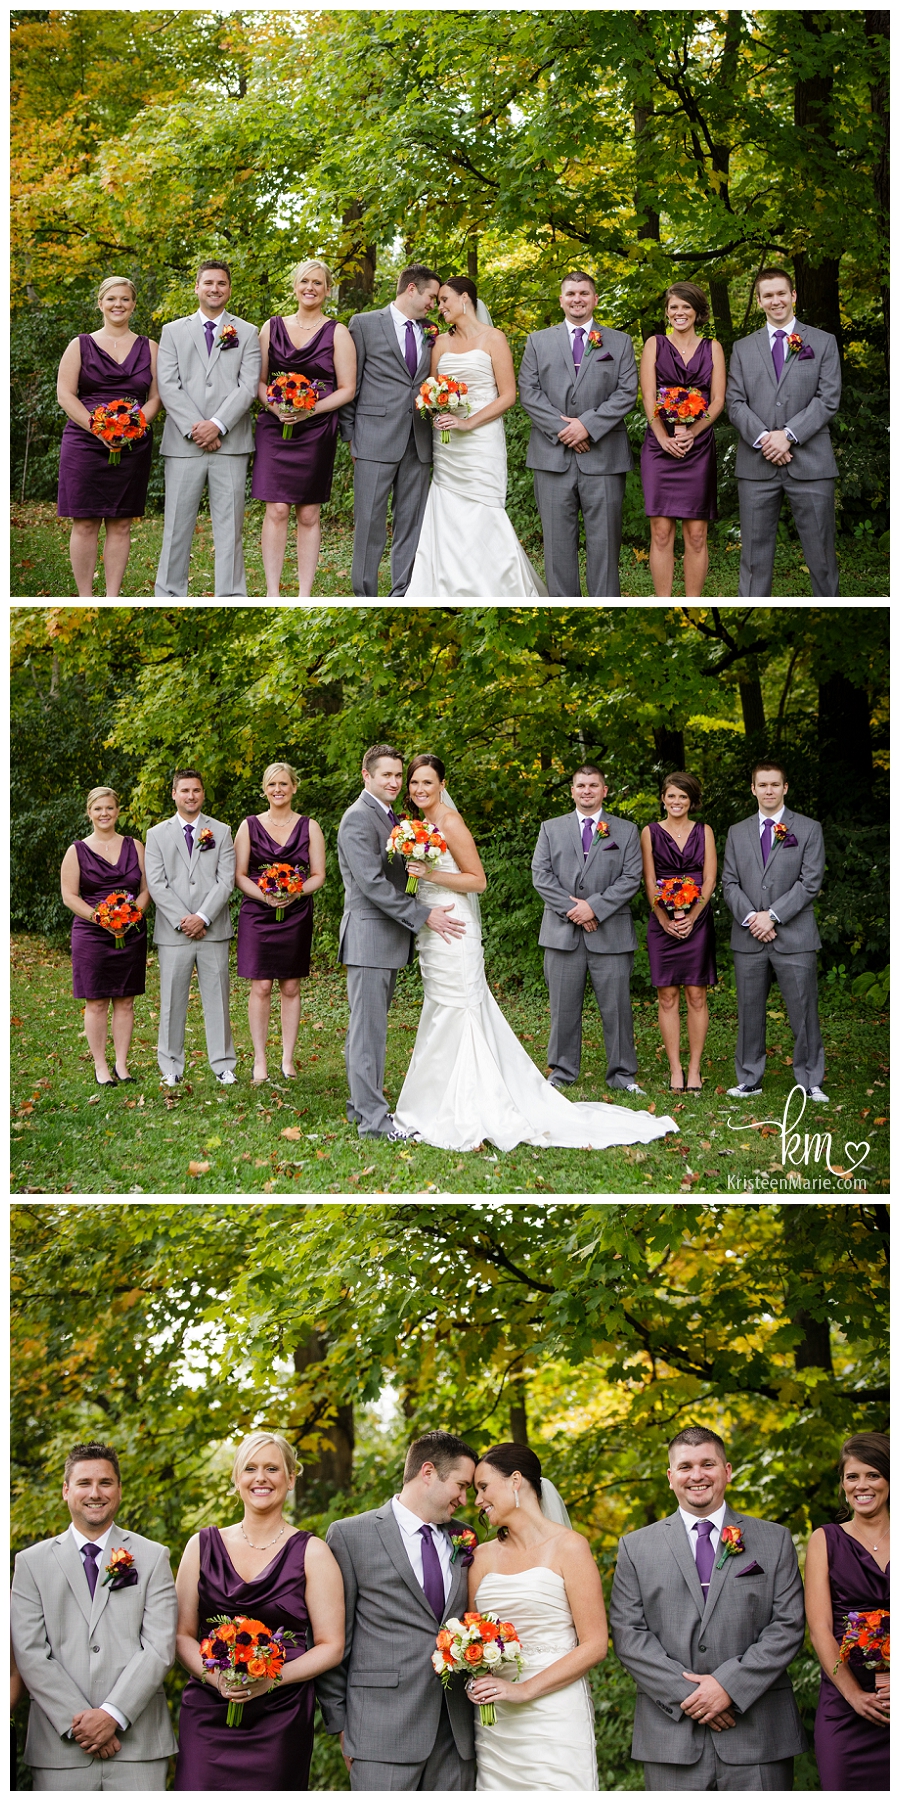 The bridal party - Indy Wedding